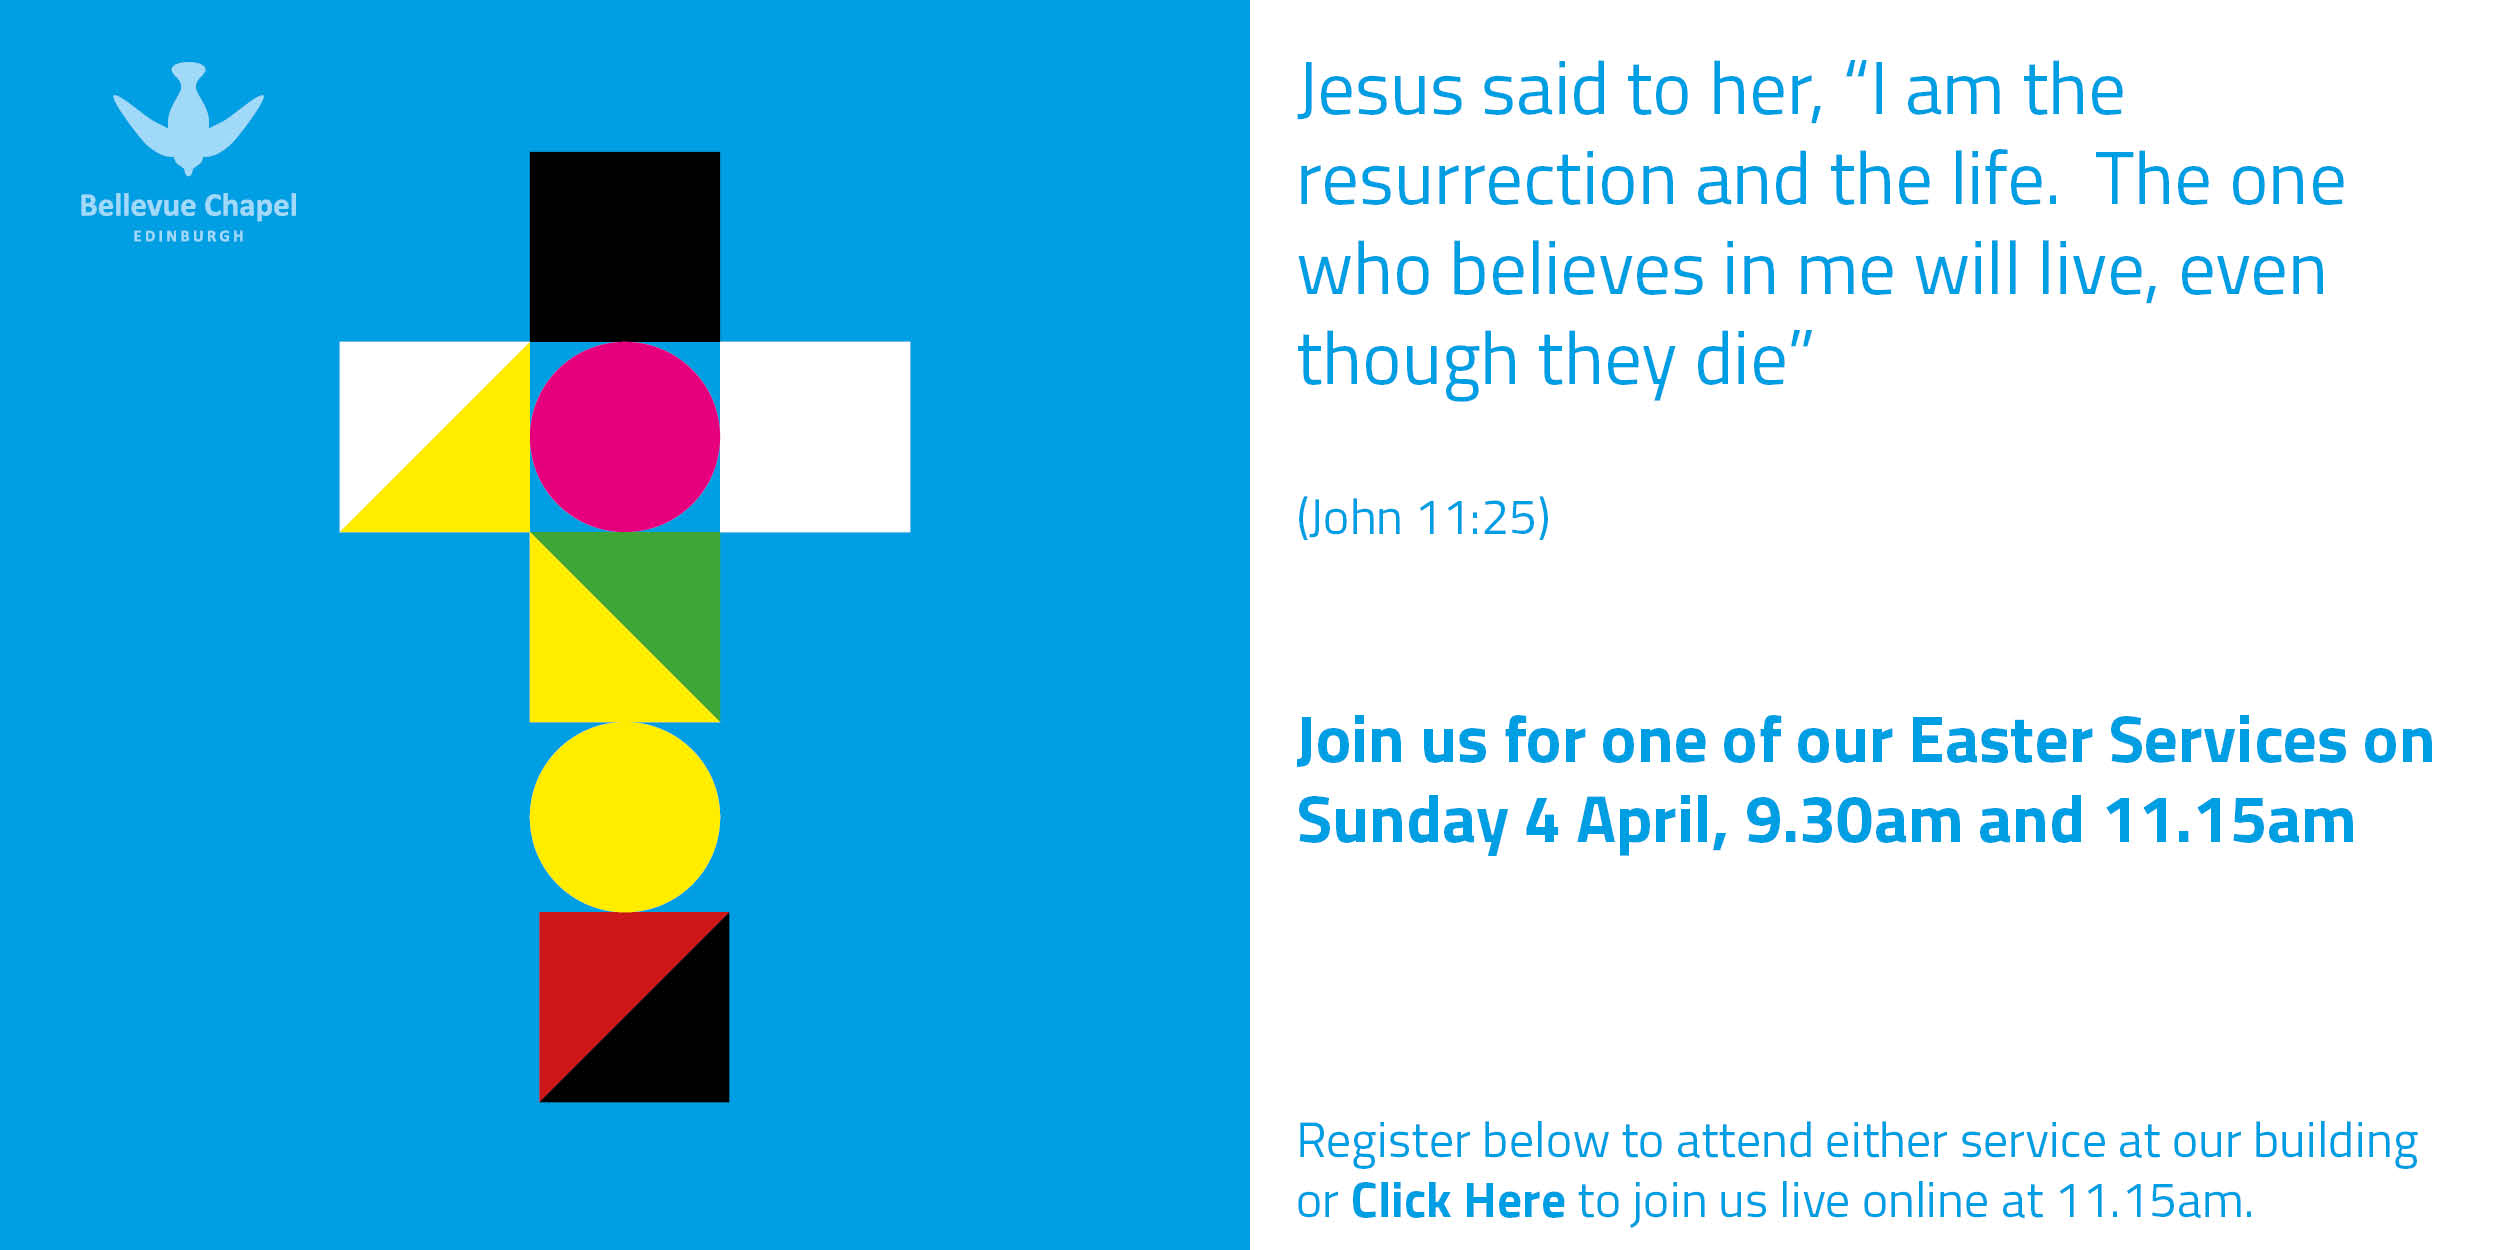 Join us for one of our Easter Services